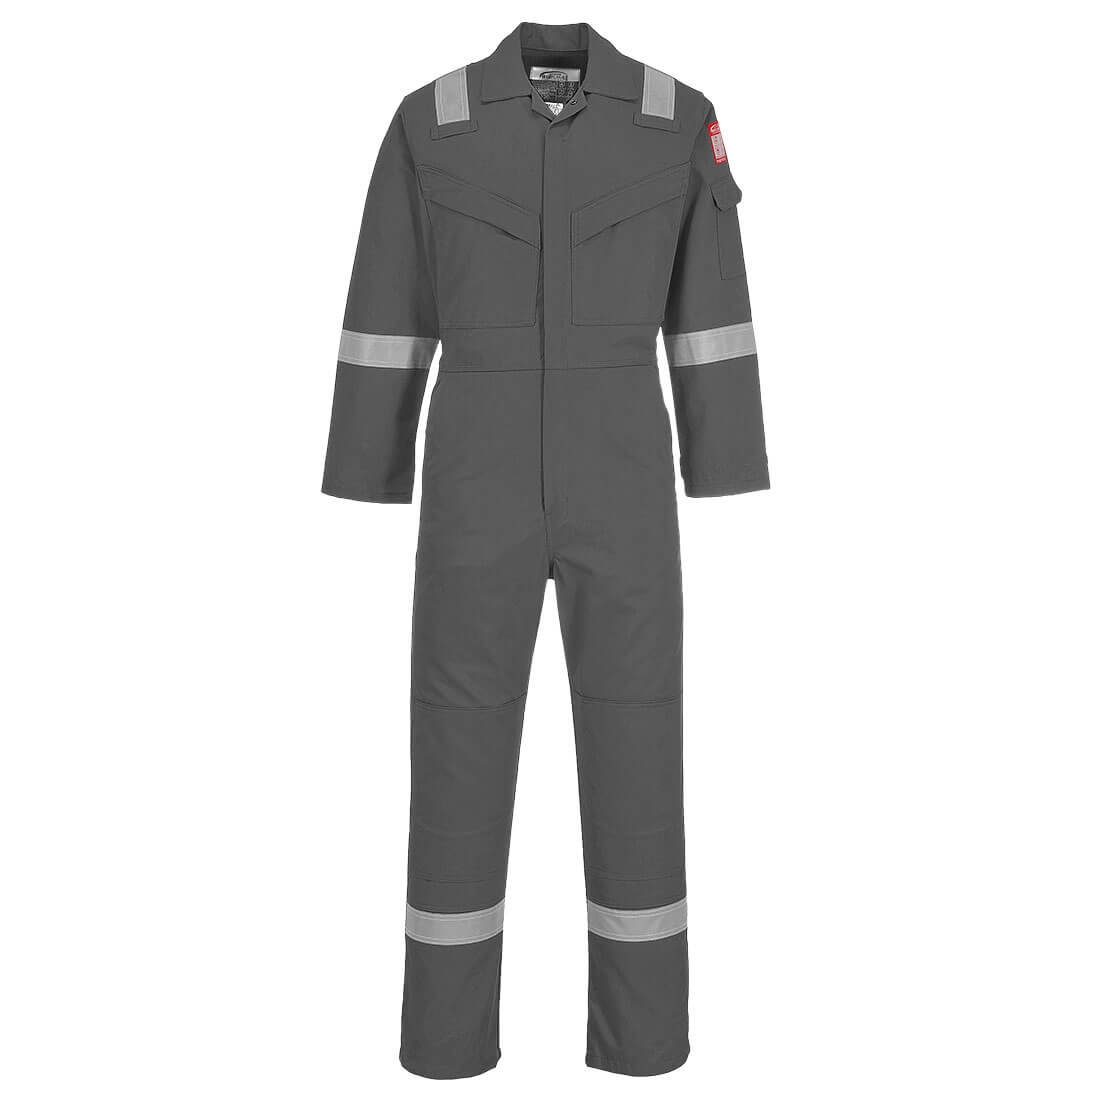 Image of Biz Flame Mens Aberdeen Flame Resistant Antistatic Coverall Grey 5XL 32"